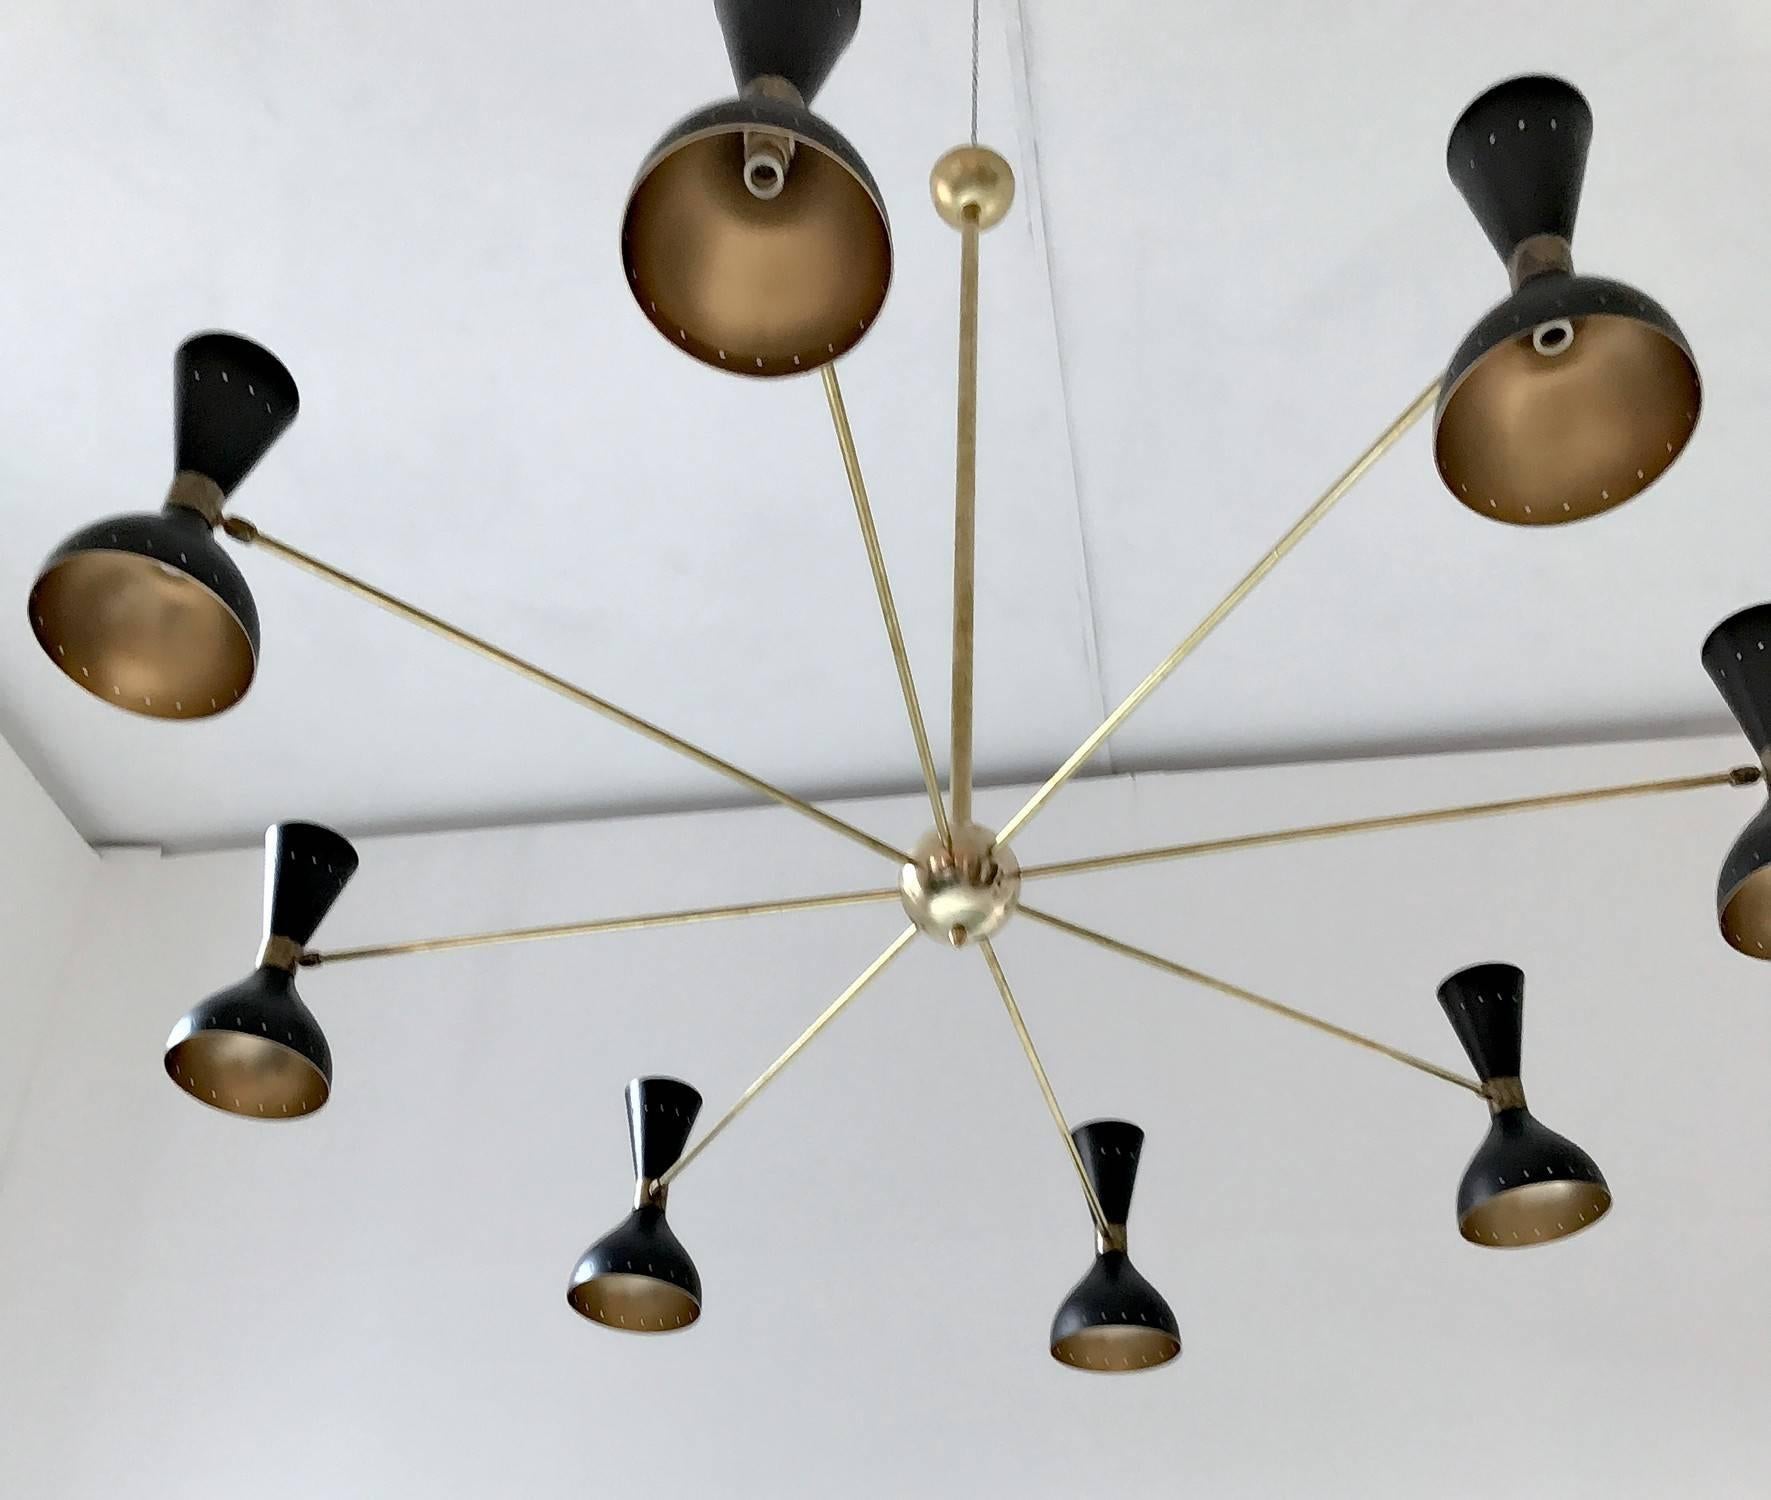 Patinated Eight-Arm Brass Chandelier, Ivory or Black Heads, Gold Inside in Stilnovo Style For Sale